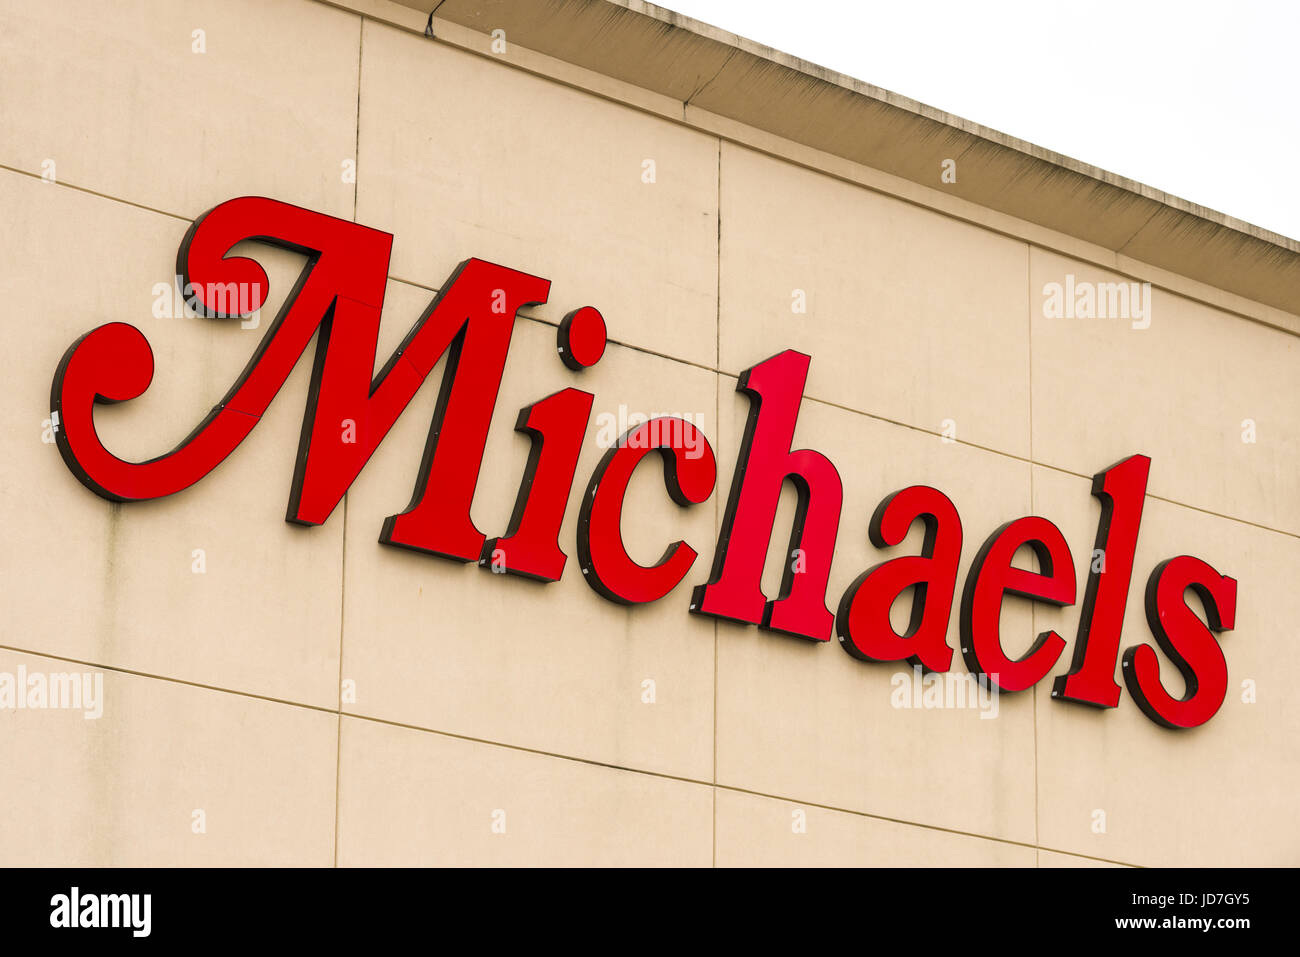 TOP 10 BEST Michaels Arts and Craft Store in Orlando, FL